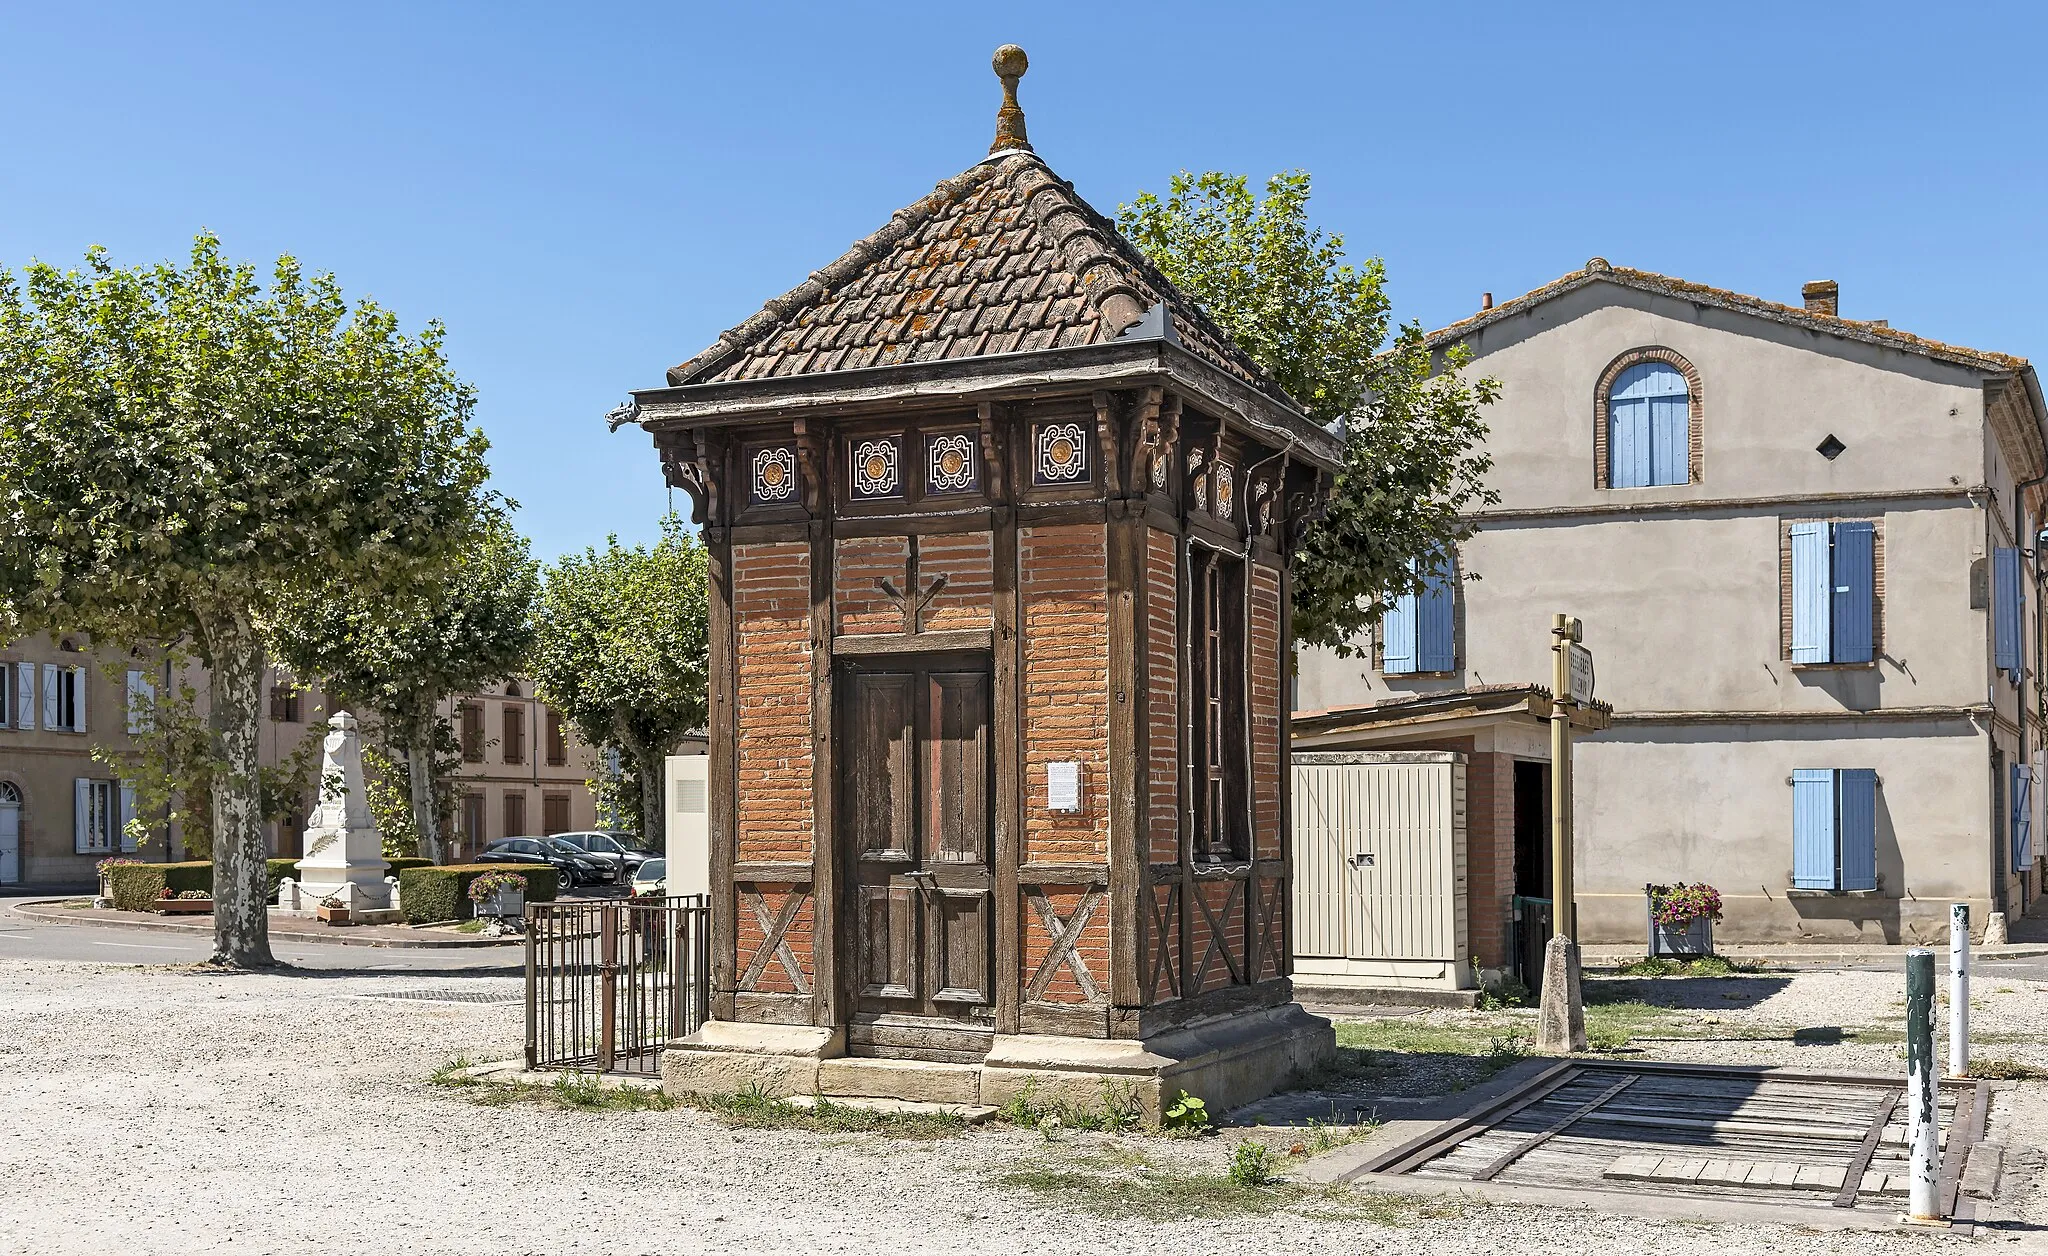 Photo showing: Weigh house - Buzet-sur-Tarn, France. 19th century half-timbered building with ceramic frieze.